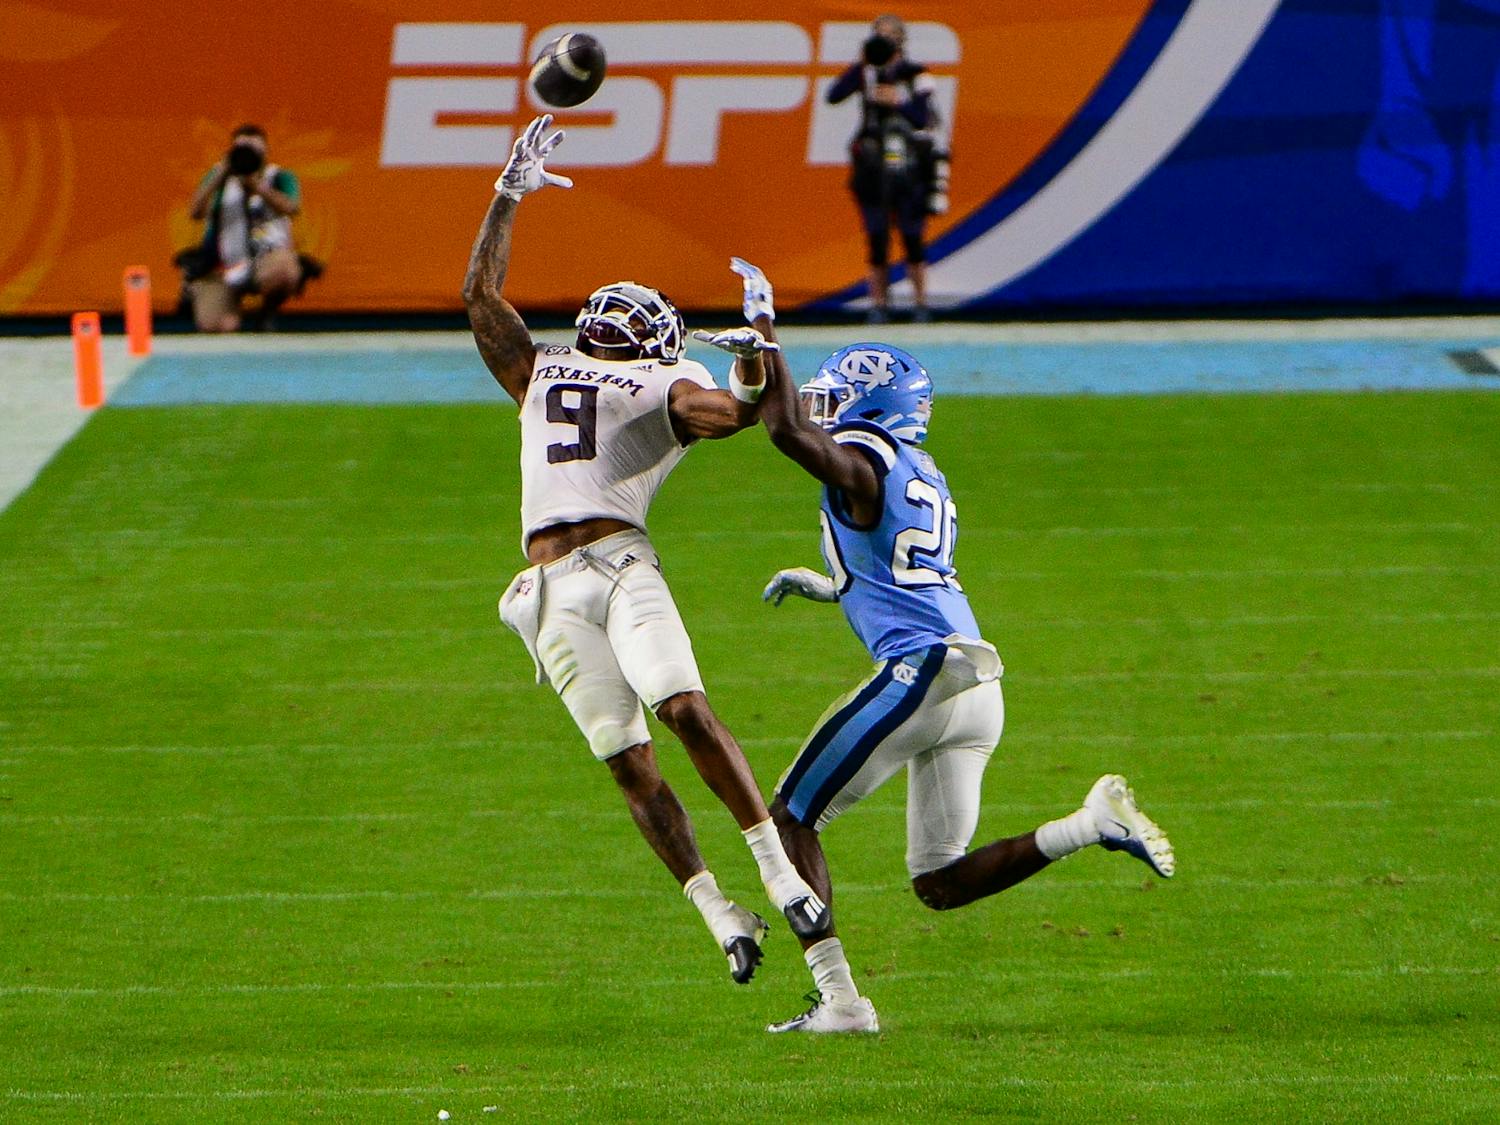 Texas A&M junior wide receiver Hezekiah Jones (9) attempts to catch the ball around UNC's first year defensive back Tony Grimes (20) during the Capital One Orange Bowl in Hard Rock Stadium on Saturday, Jan. 2, 2021. Texas A&M beat UNC 41-27.